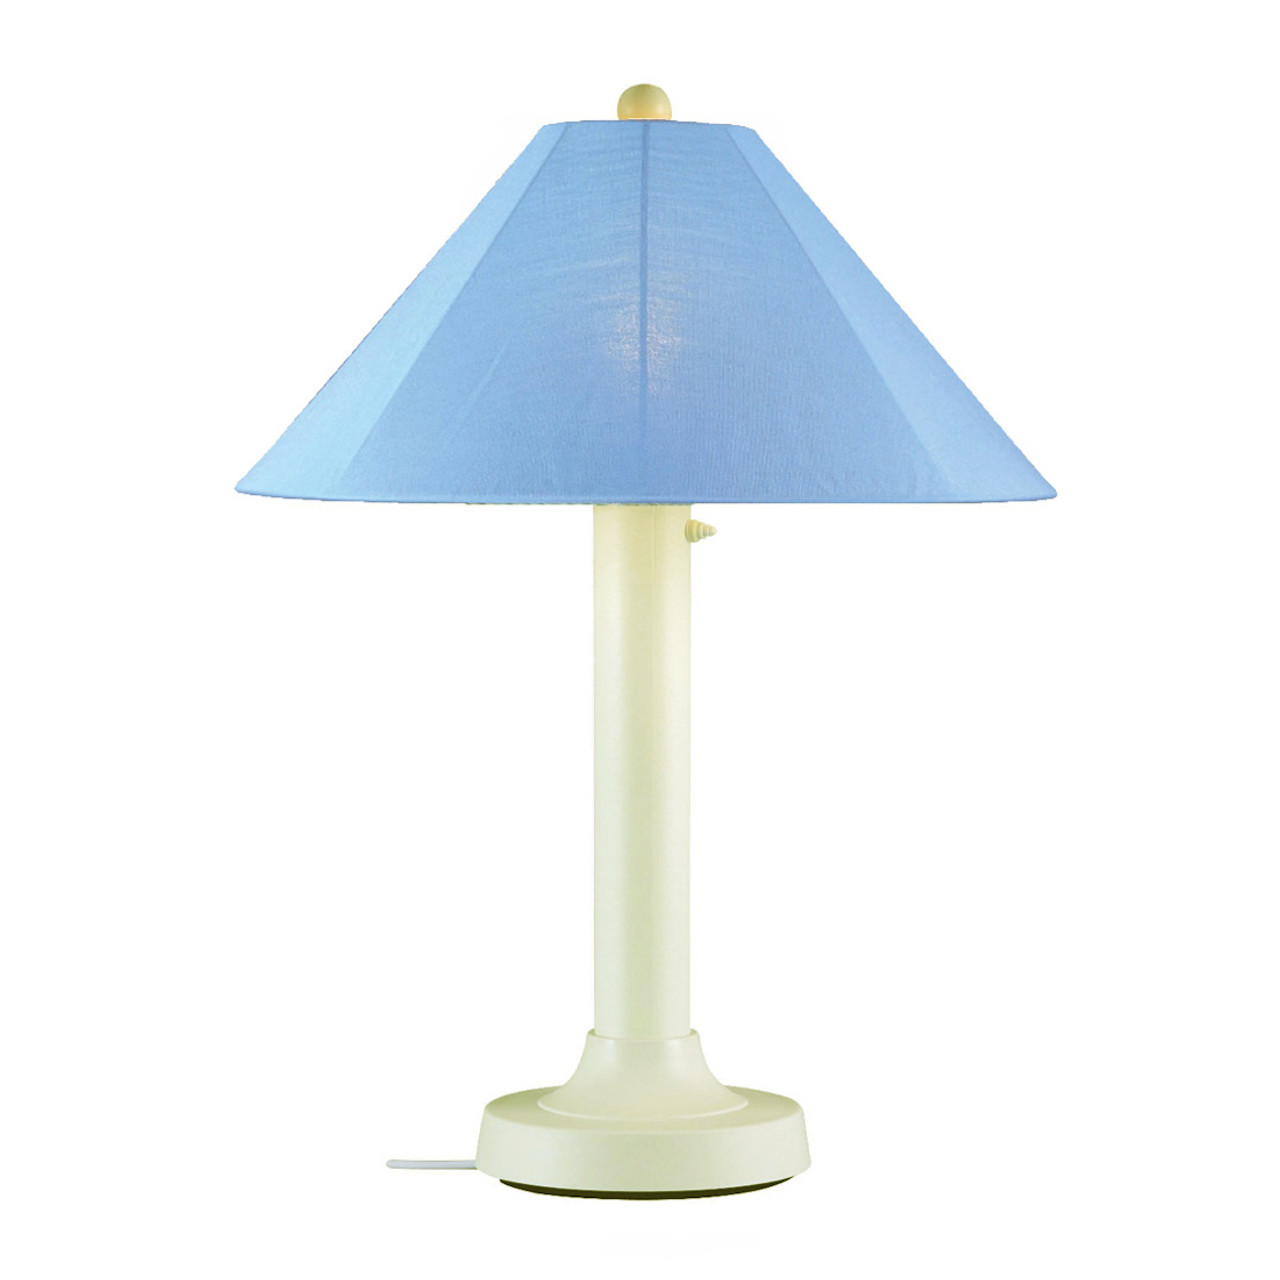 Patio Living Concepts 39-644 Catalina Table Lamp 39644 with 3" bisque body and sky blue Sunbrella shade fabric